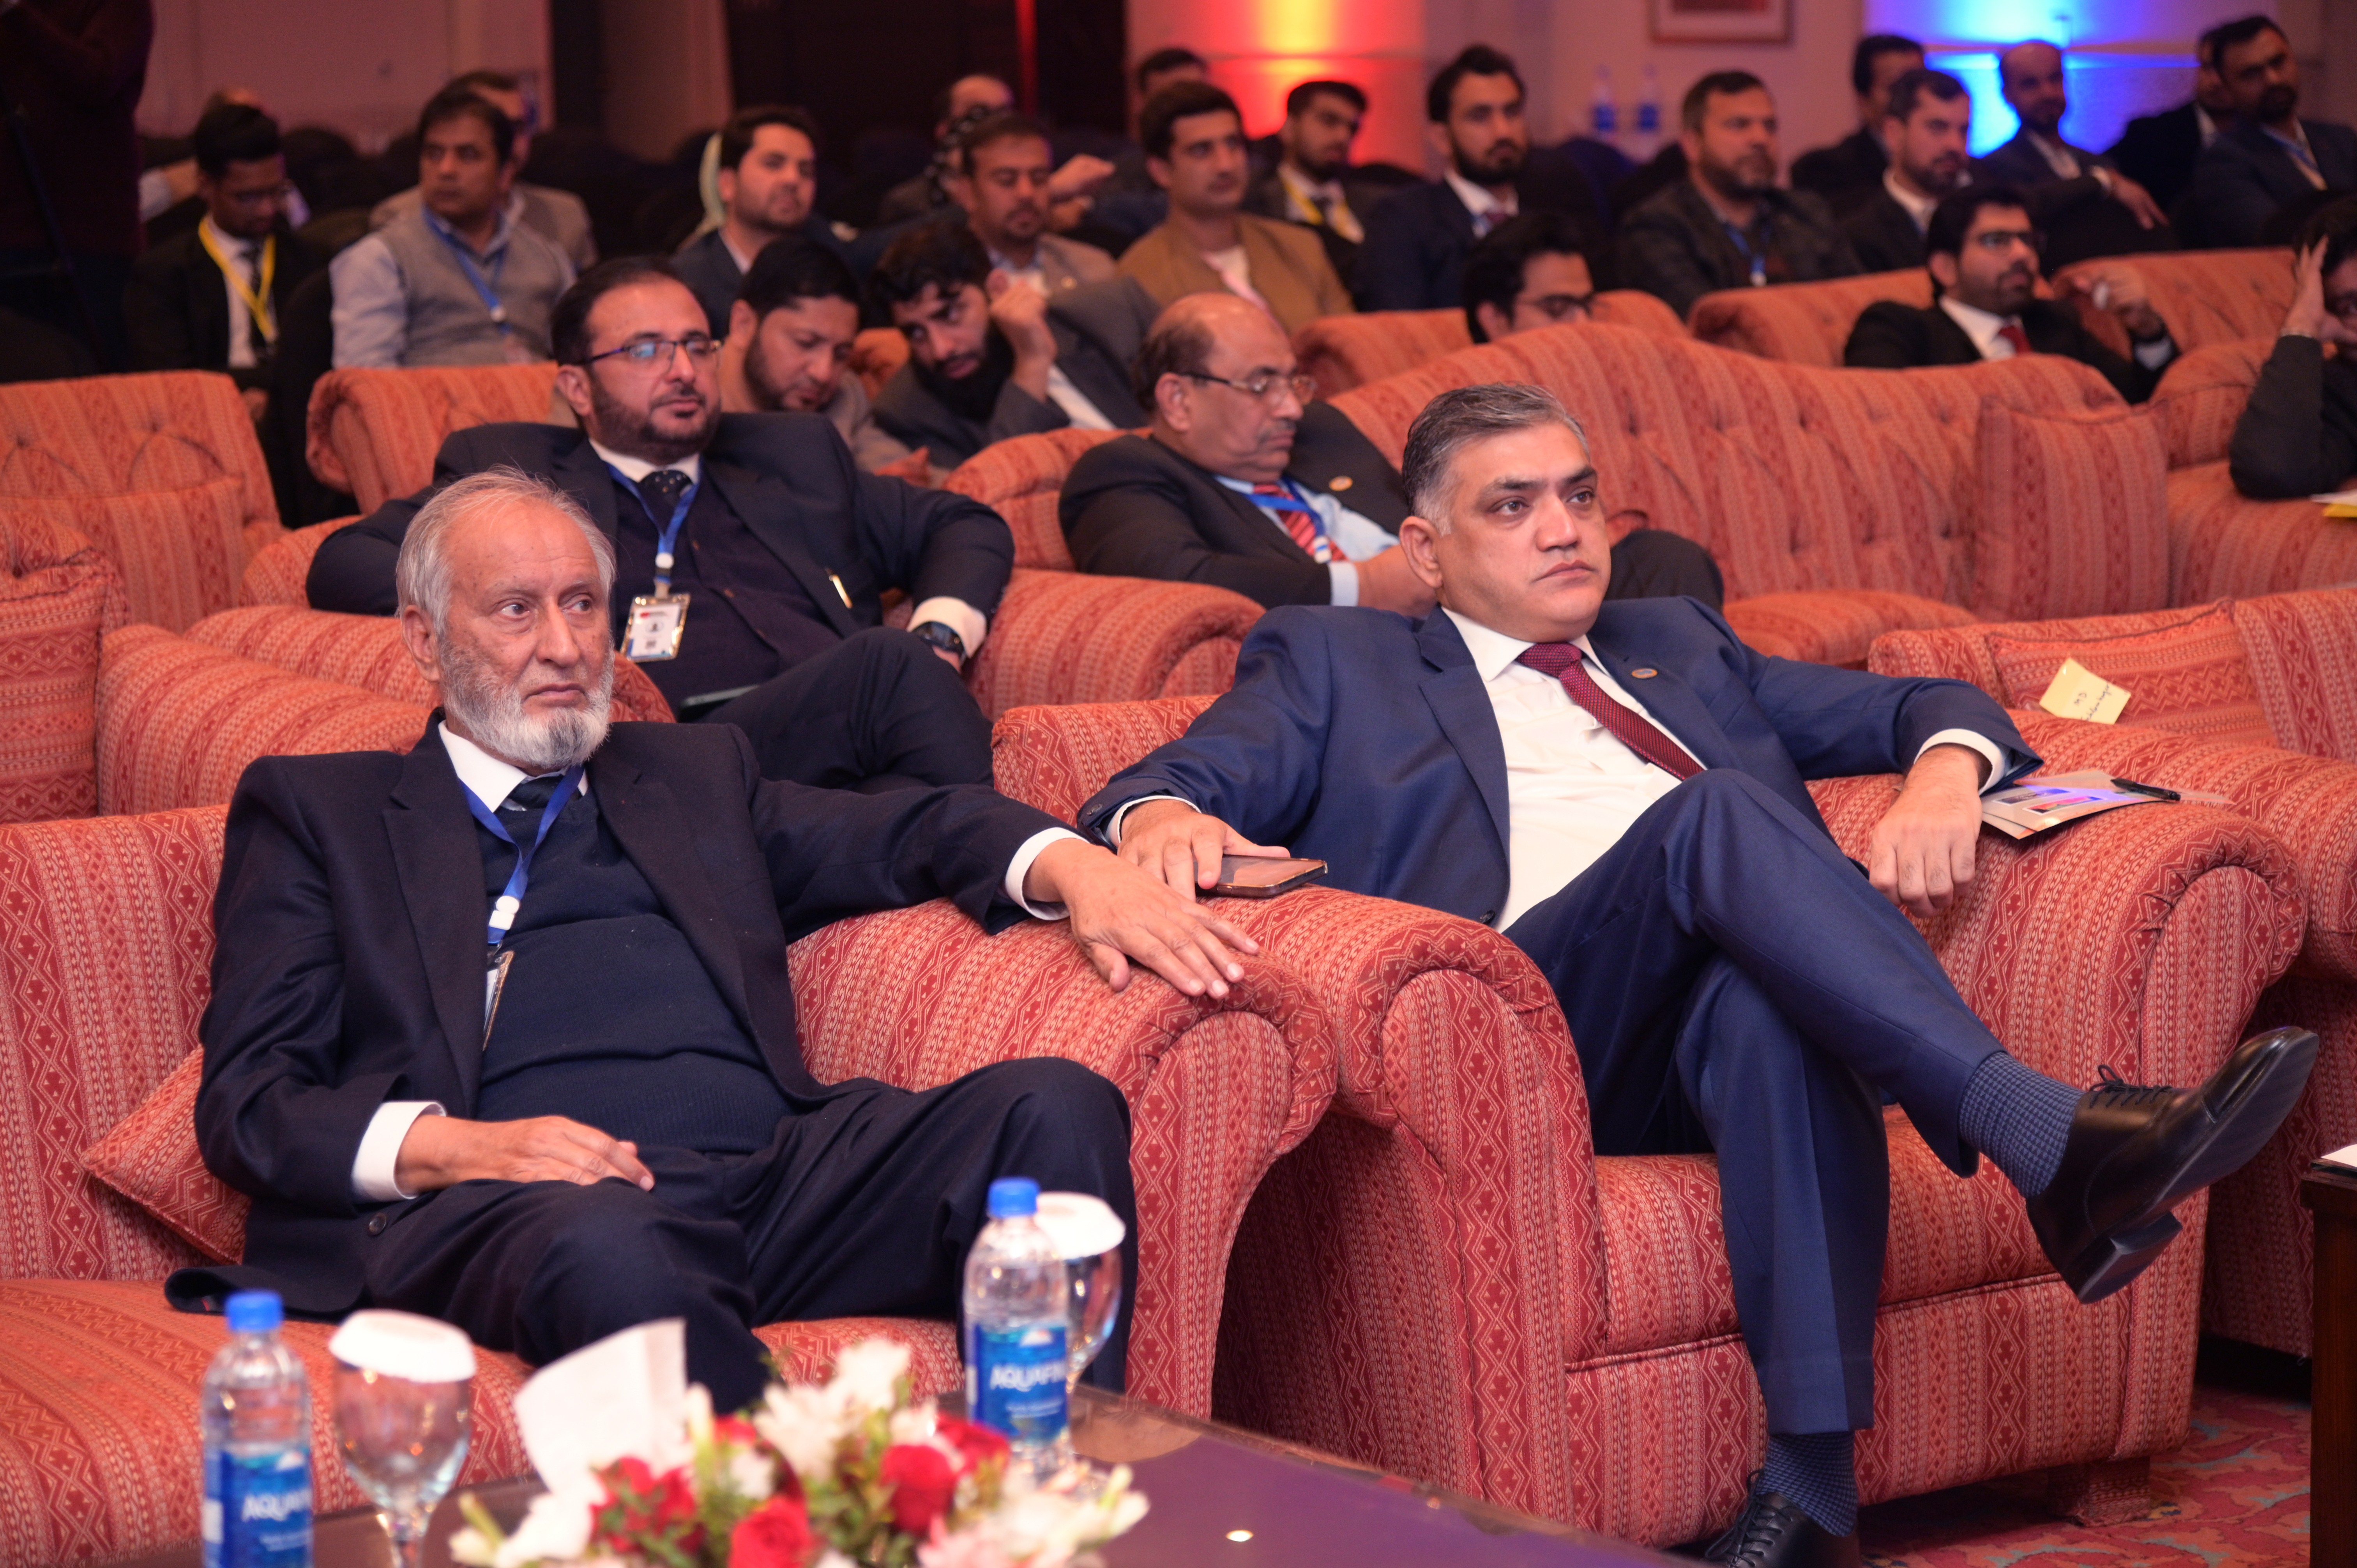 The participants of the event attending the session of ATC